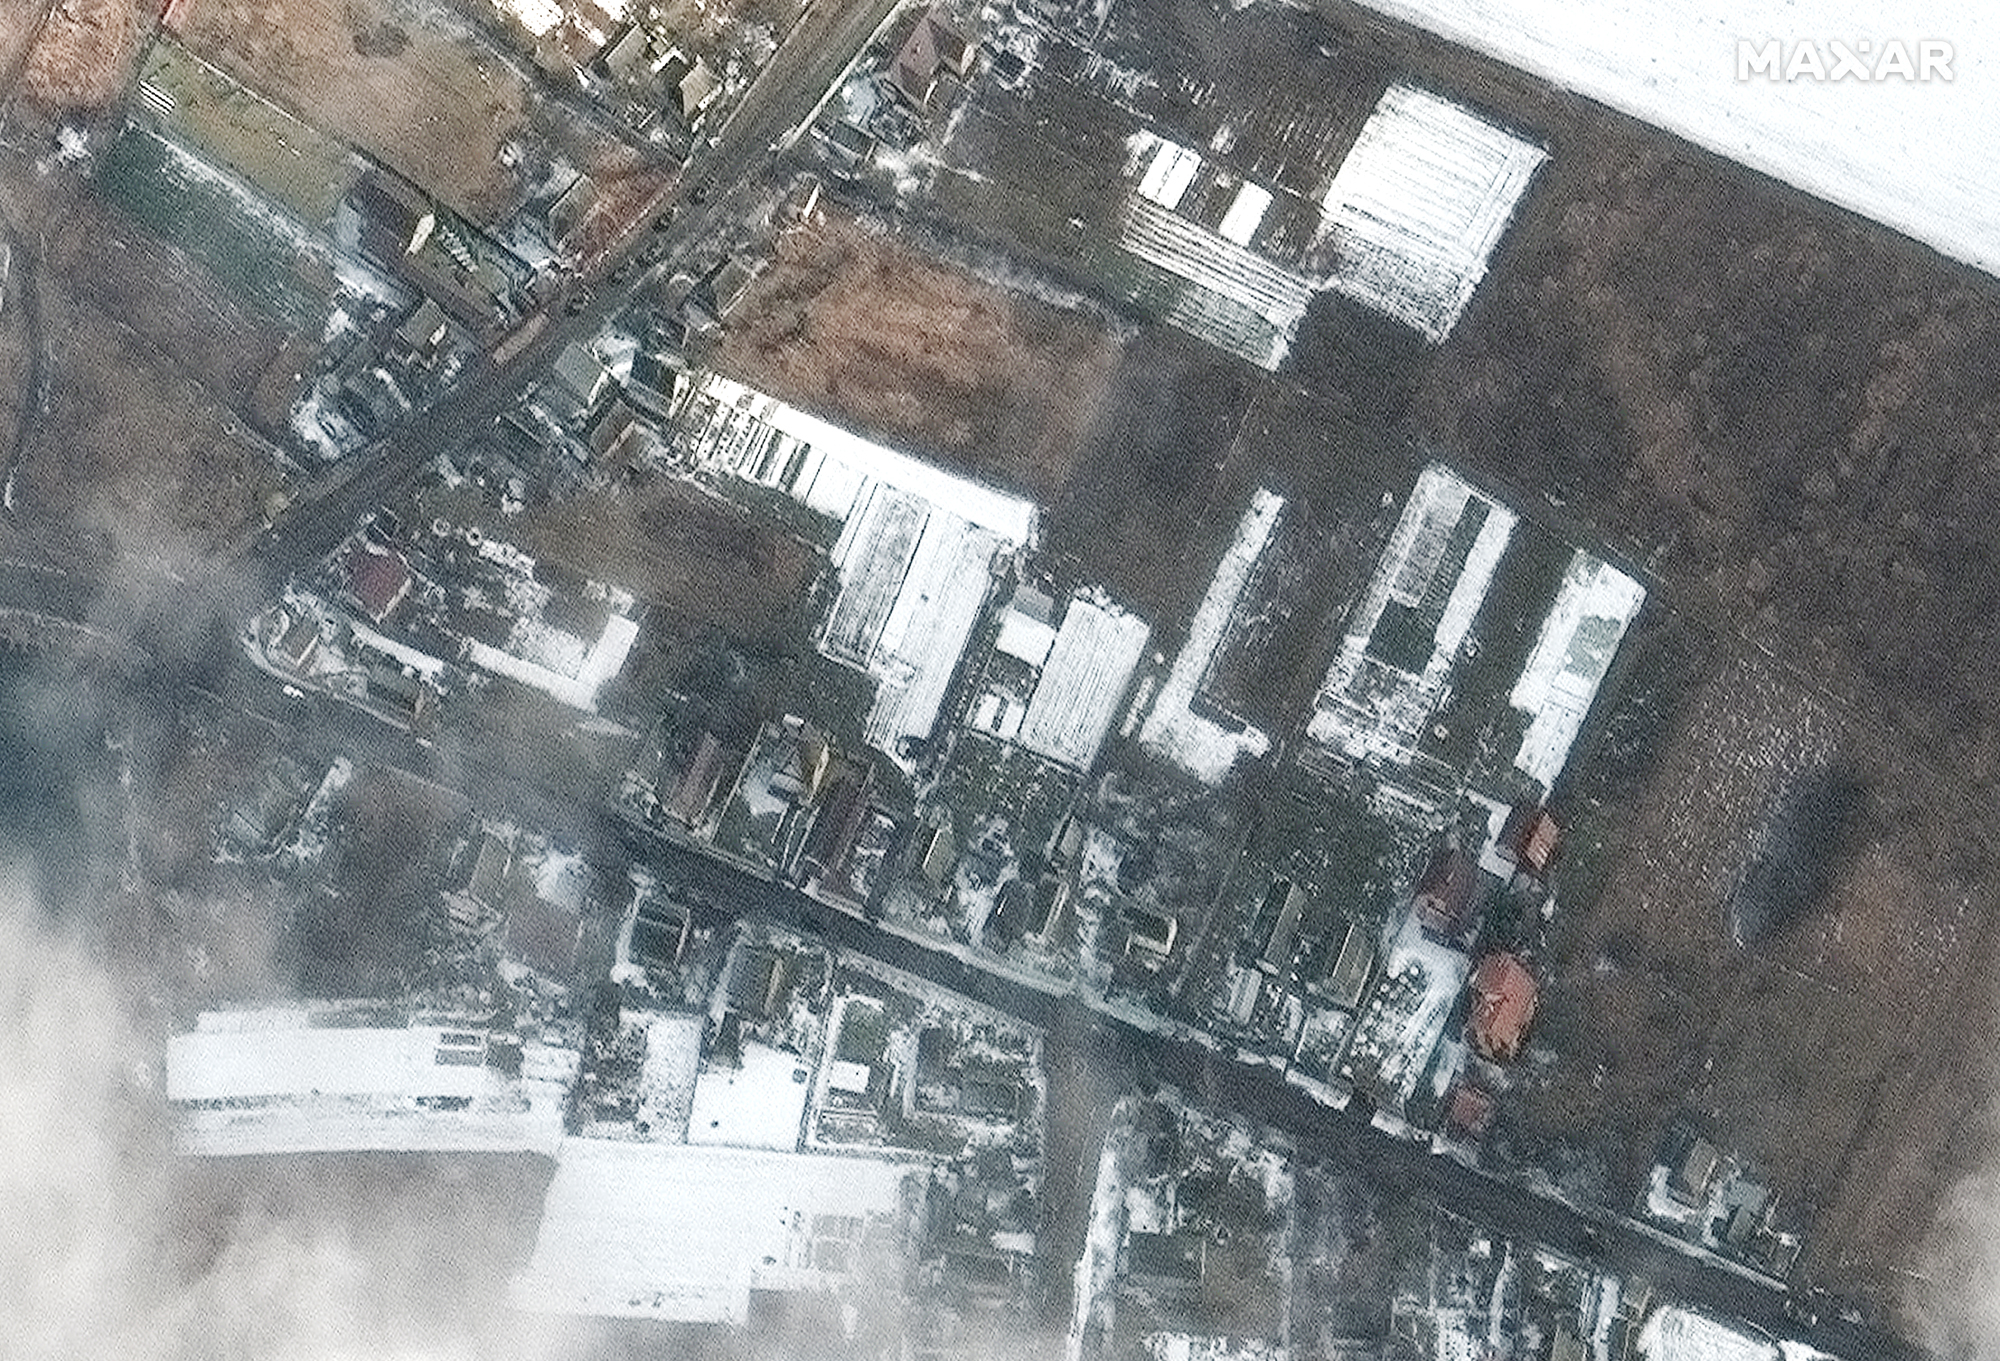 Another view of armored vehicles moving northeast of the Antonov Airport in Hostomel, Ukraine in this view taken on March 8, 2022 by Maxar Technologies' WorldView 3 satellite.